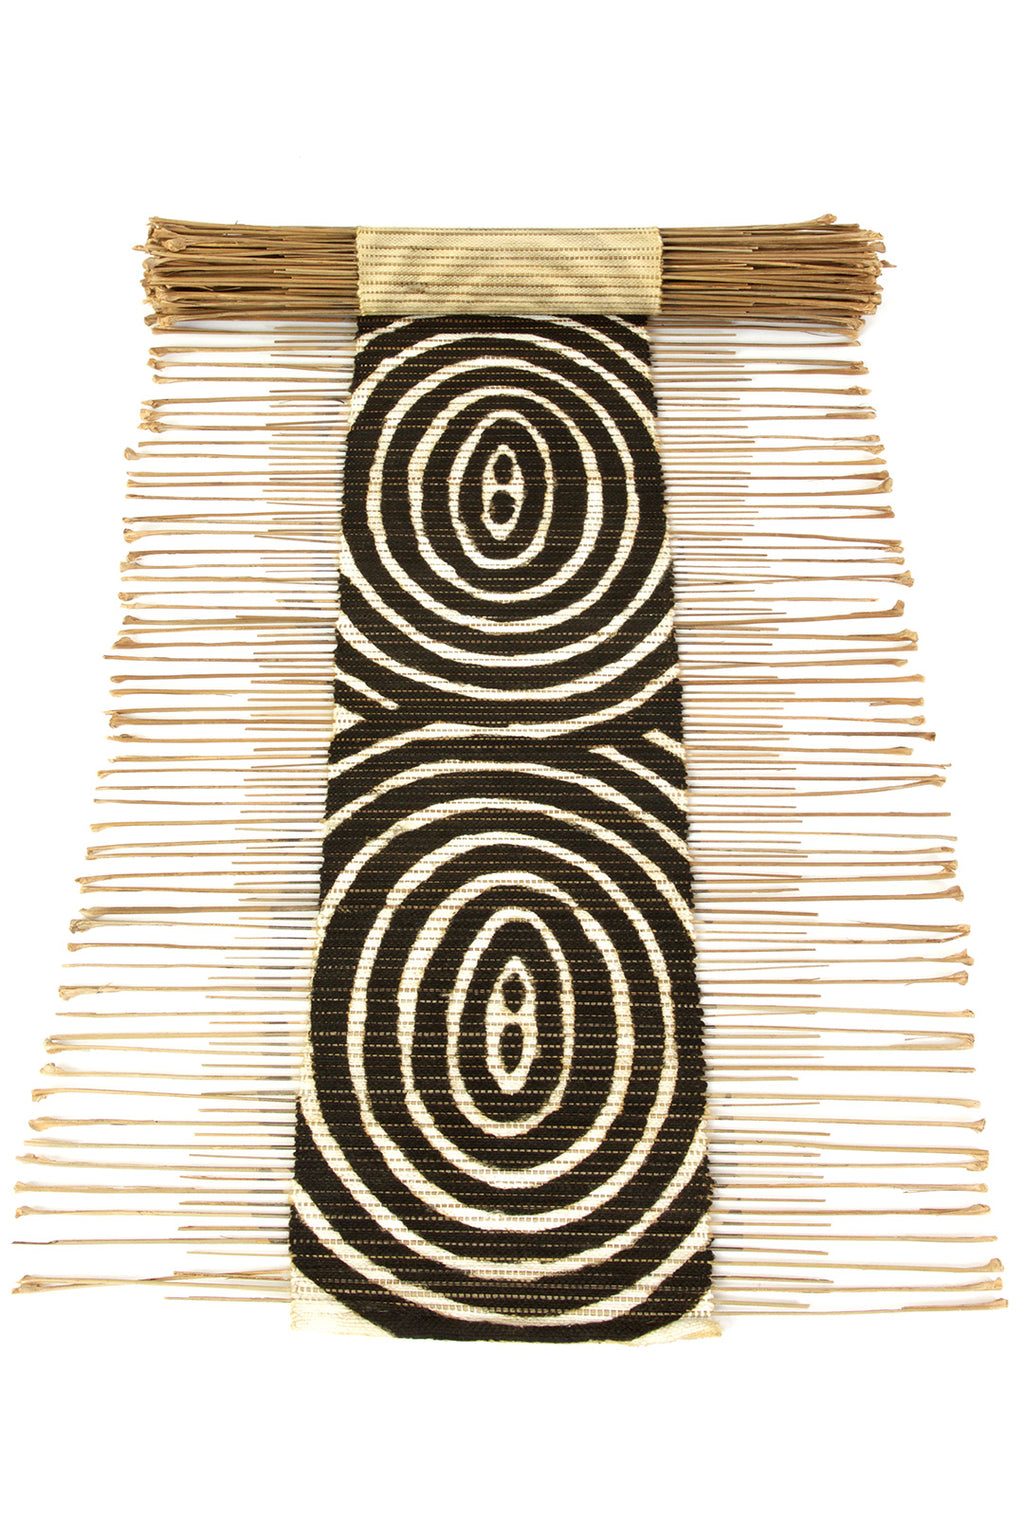 Ripple Effect Twig Table Runner Default Title